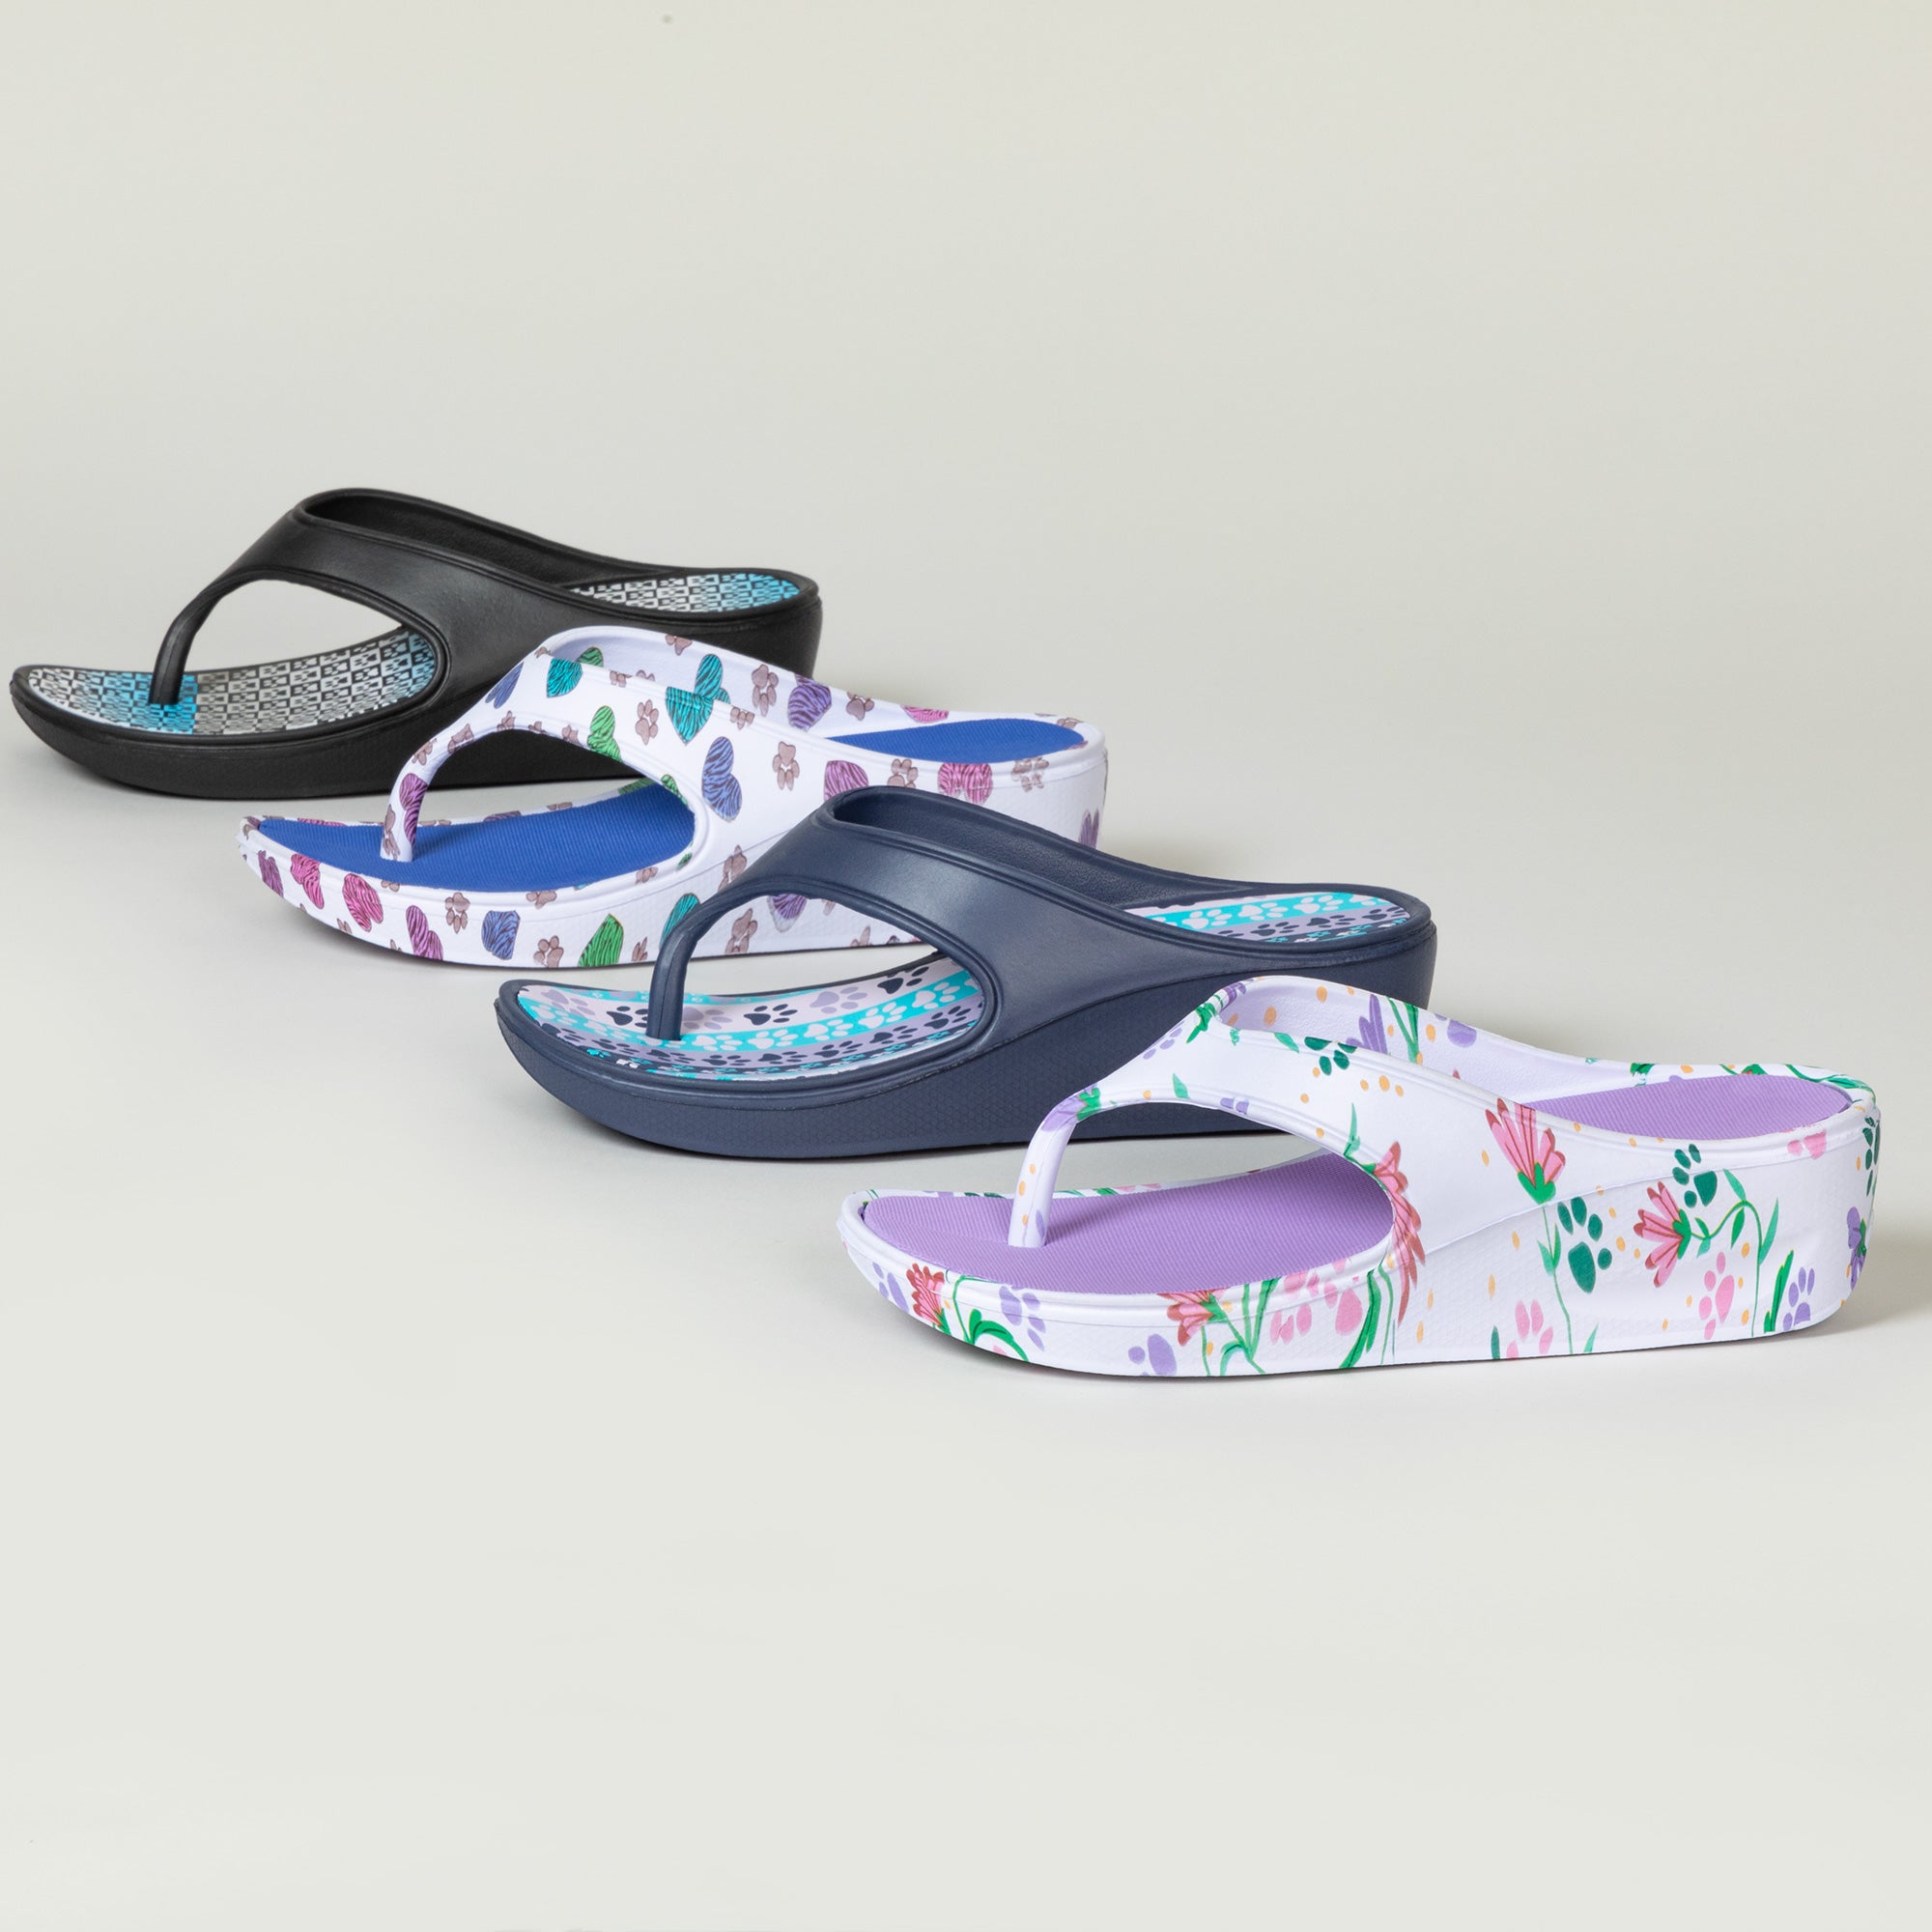 Paw Print Wedge Flip Flops - Checkered Paws - 8